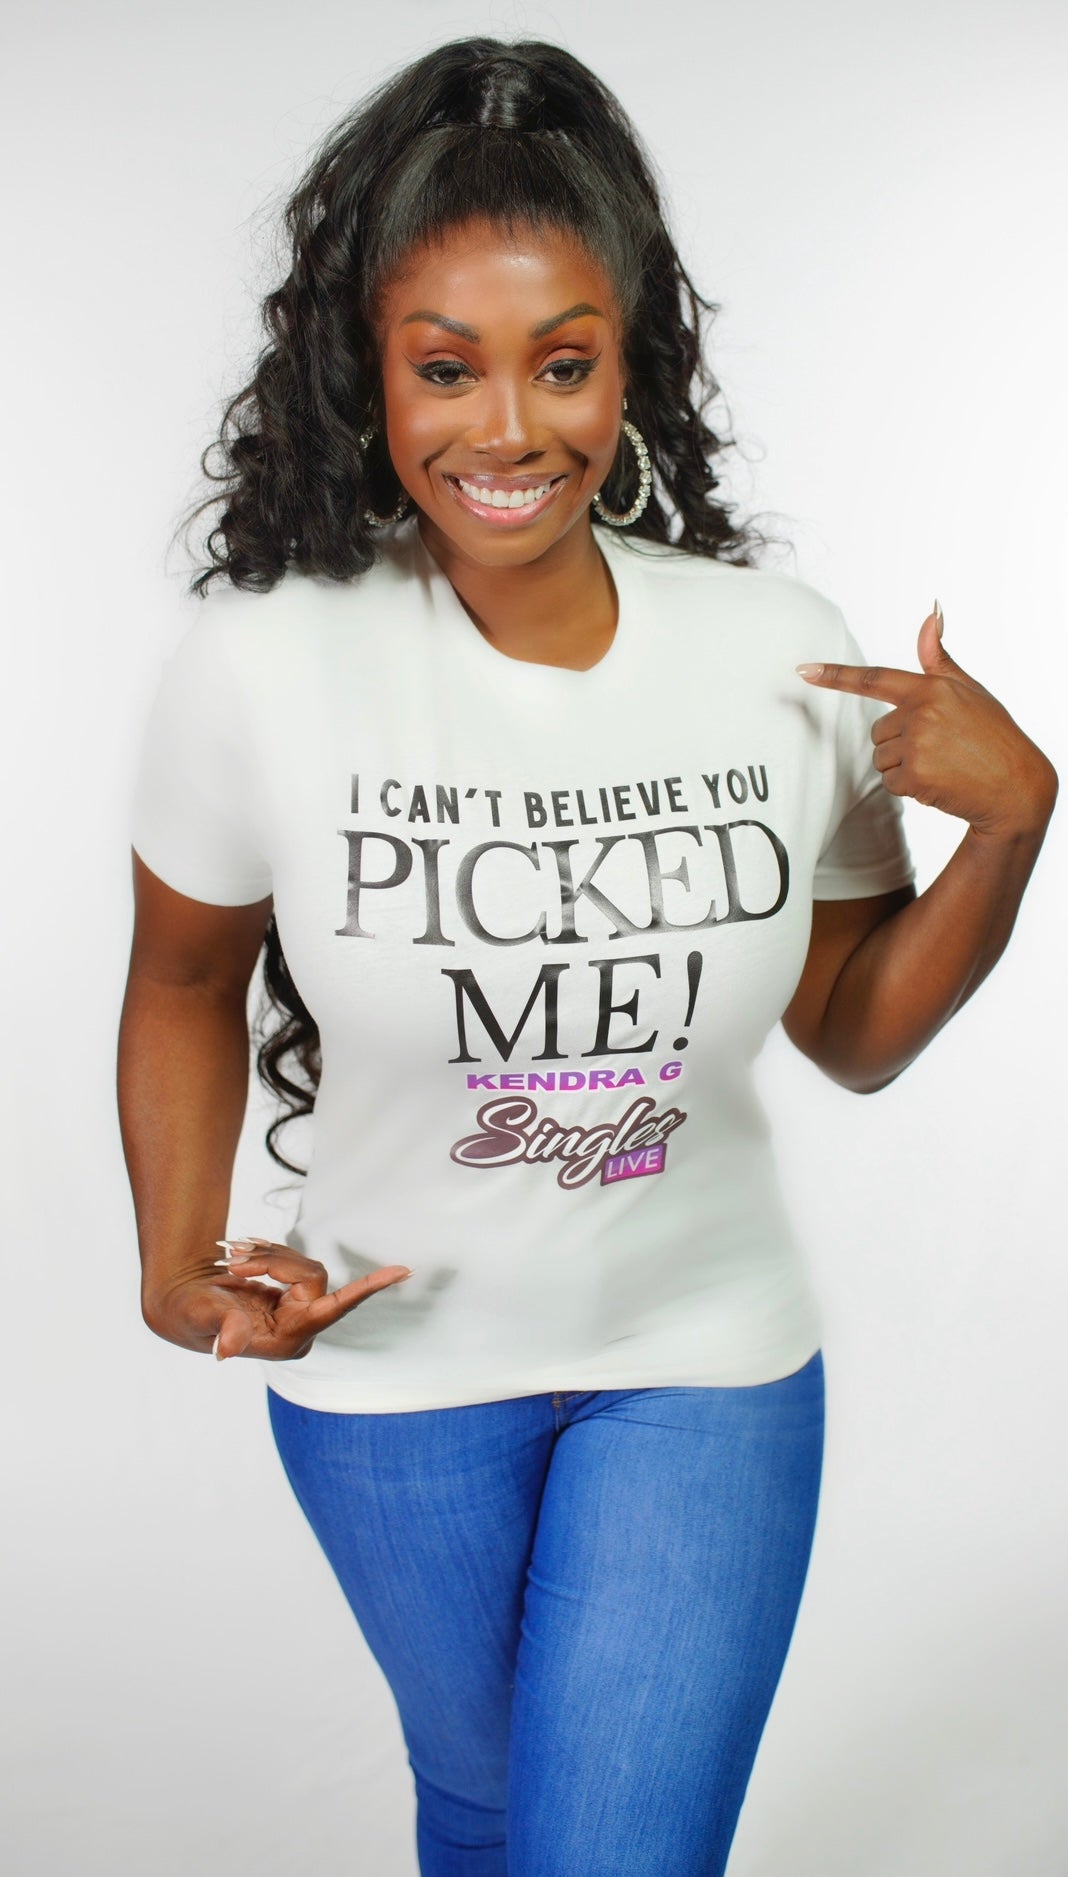 PRE-ORDER: “I Can’t Believe You Picked ME!” t-shirt (White)